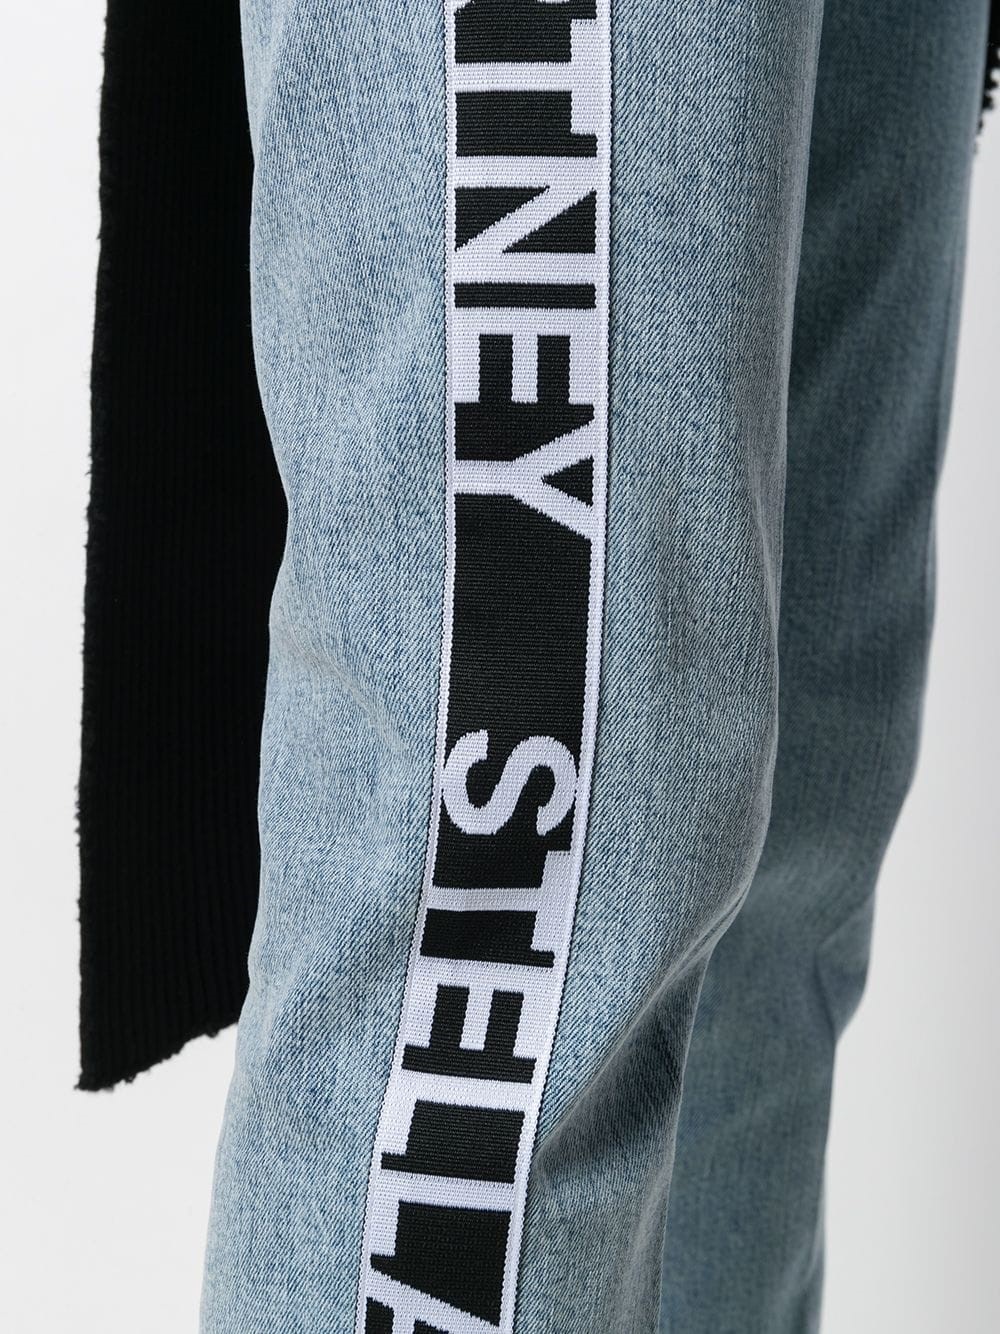 stella mccartney SIDE LOGO JEANS available on montiboutique.com